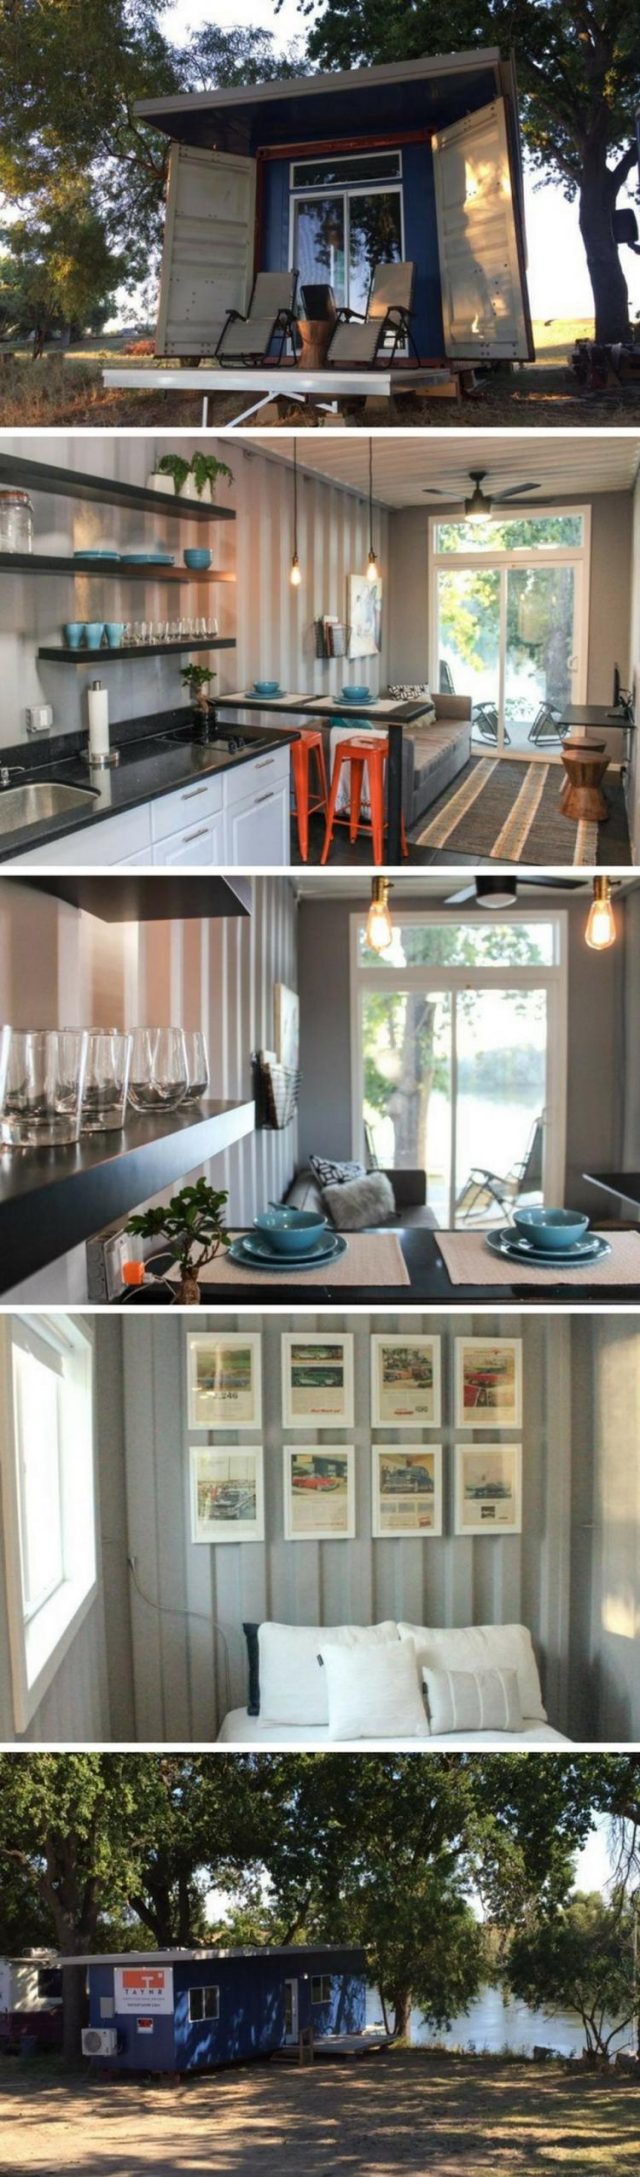 100+ Stunning Shipping Container House Design Ideas - Page 78 of 116